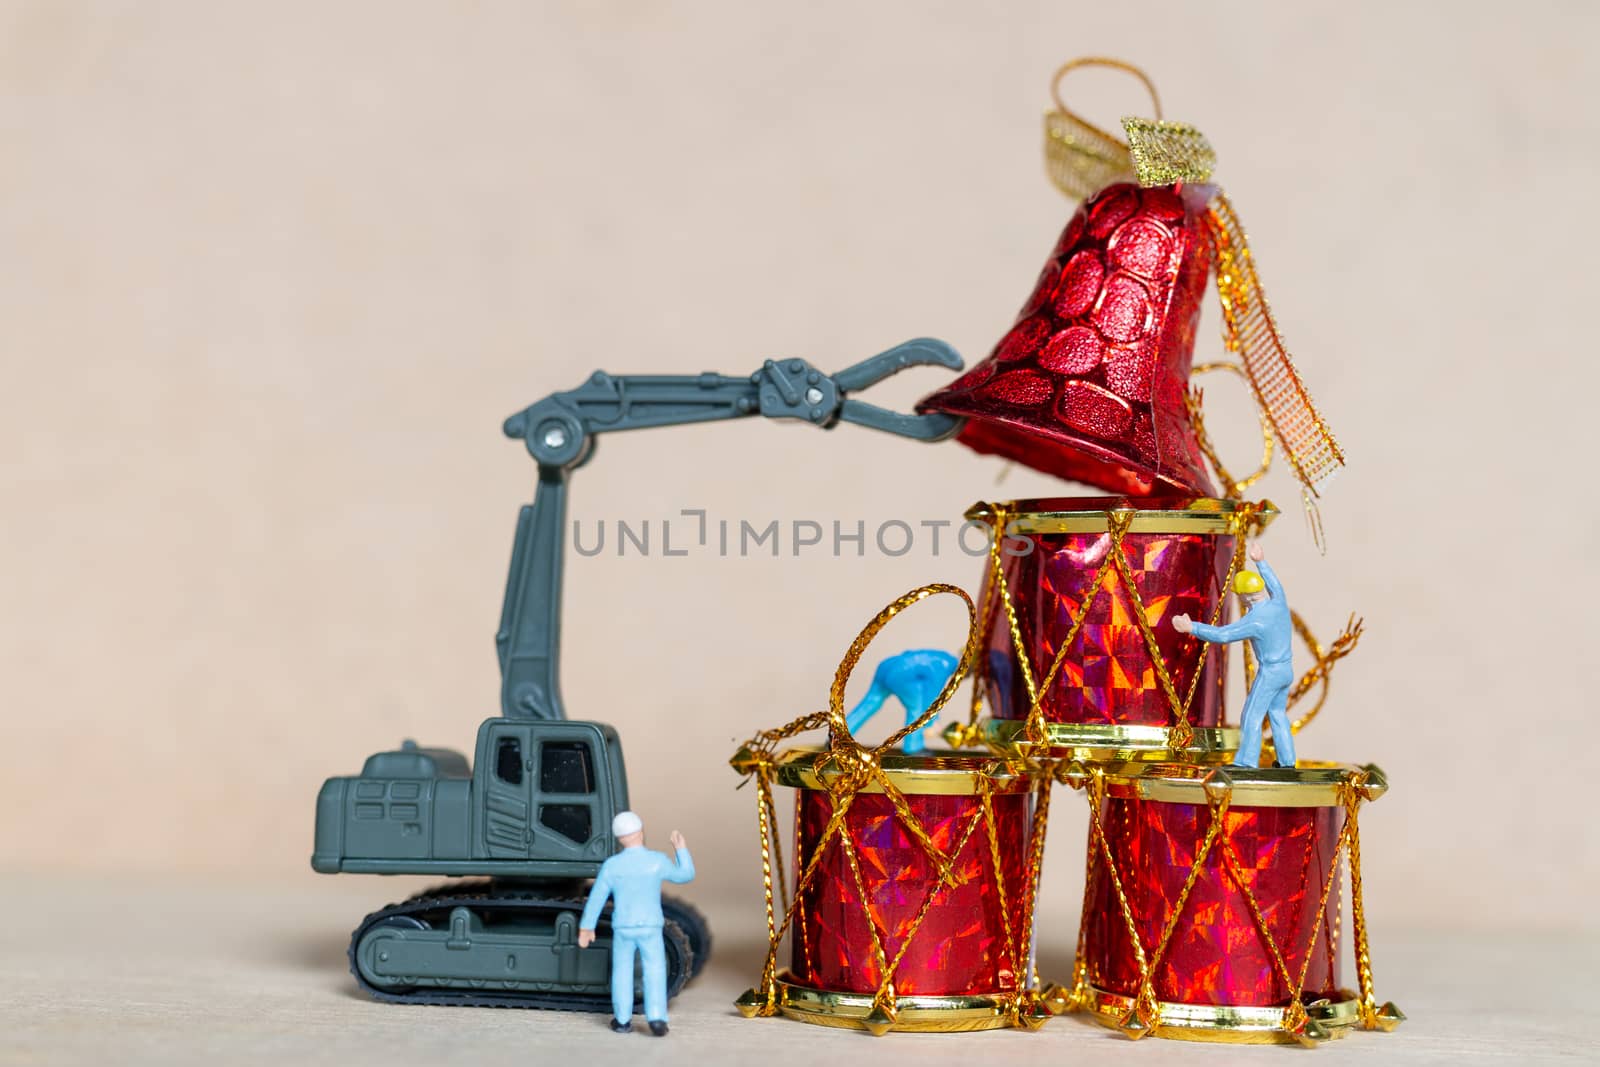 Miniature people,  Worker team working with a Christmas decoration , Christmas and Happy New Year concept.